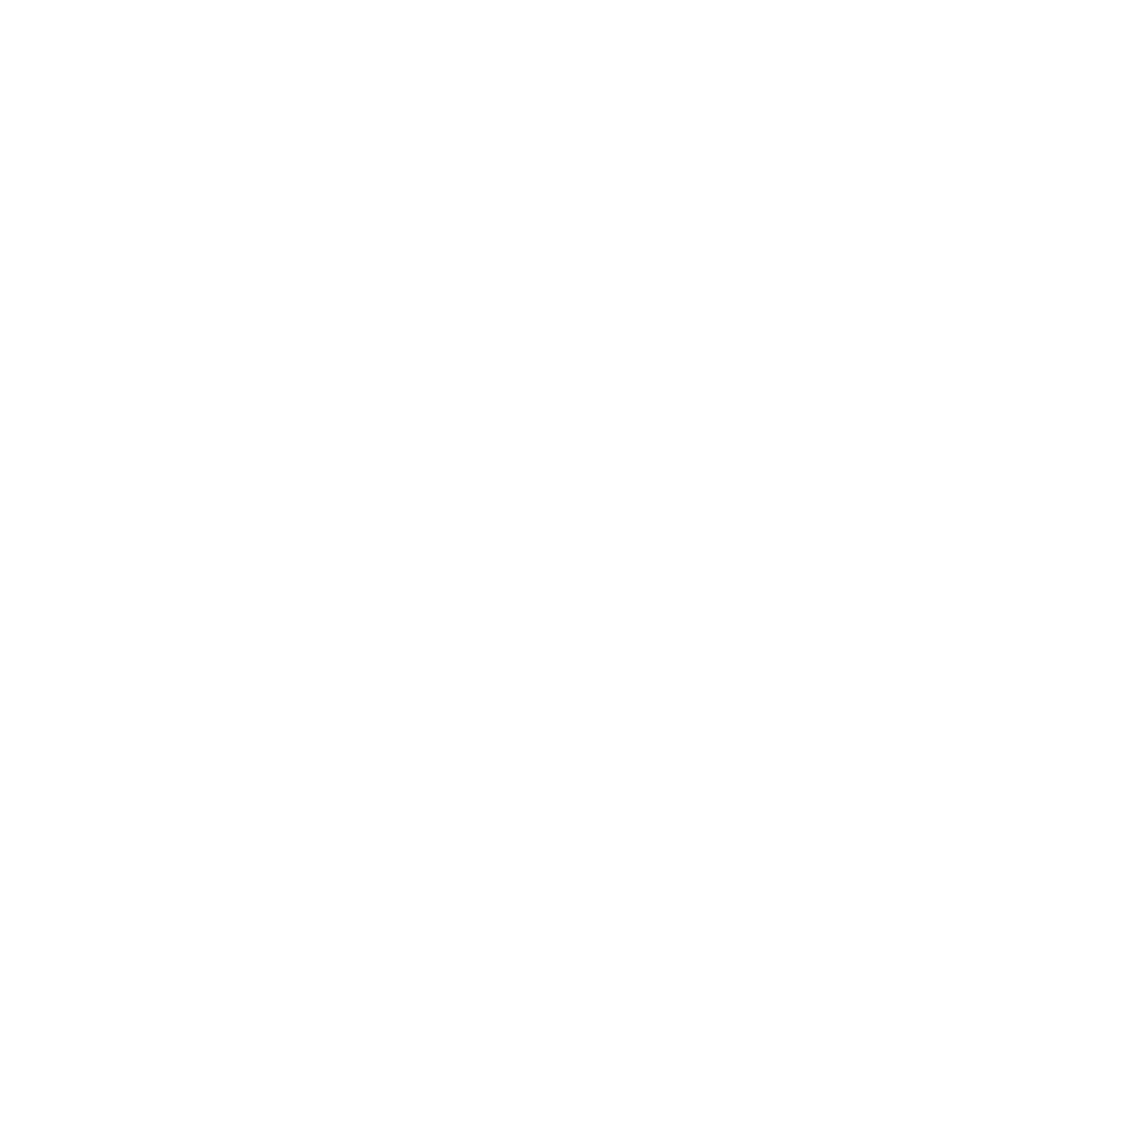 missing the-norva logo